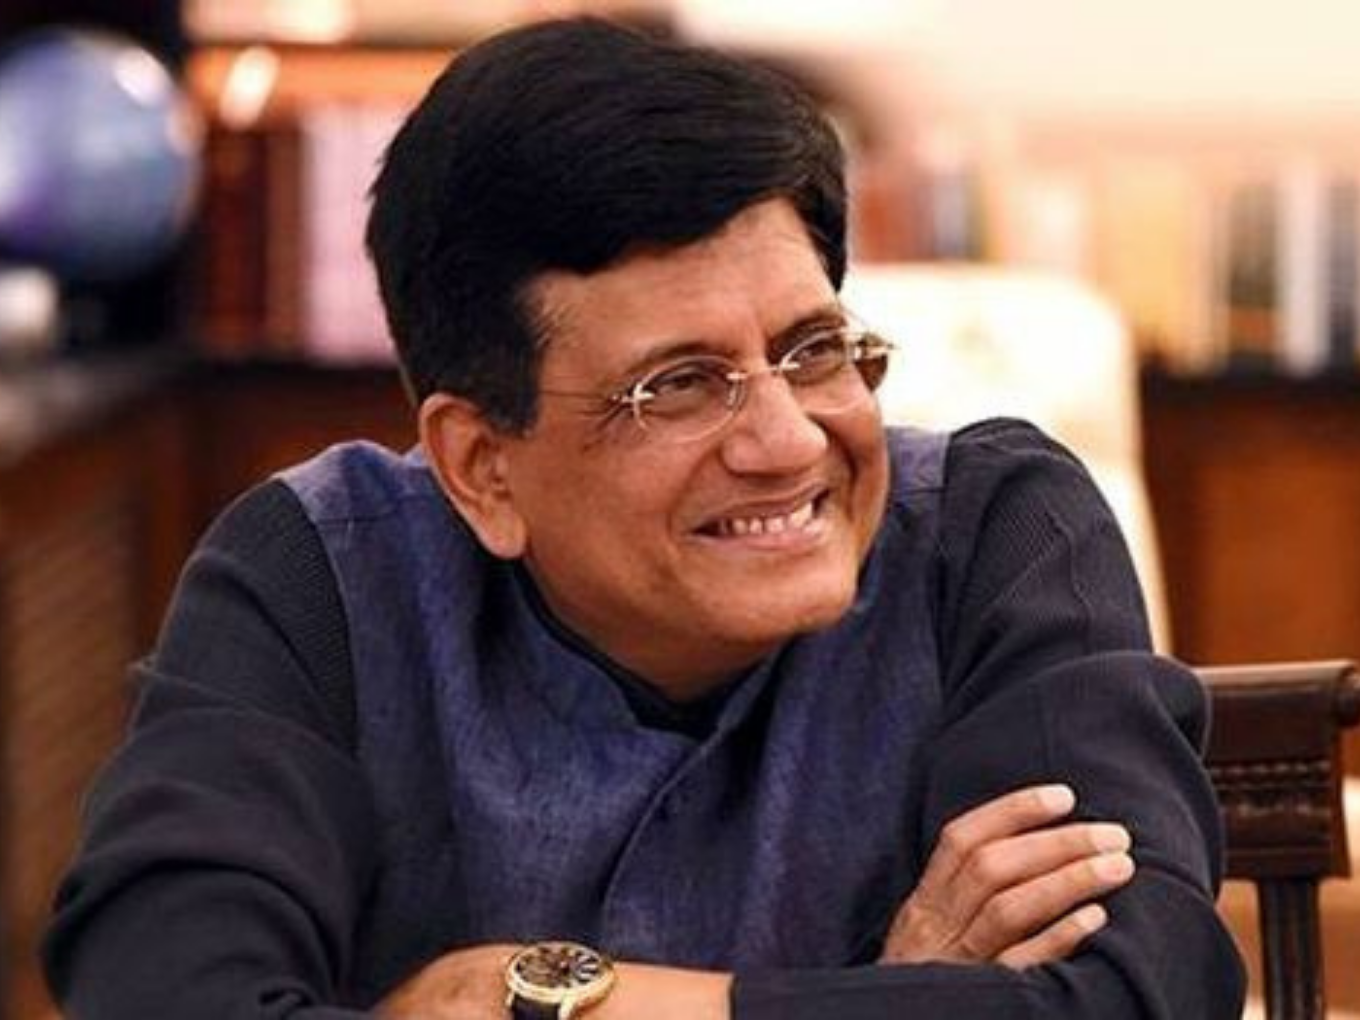 Let’s Scale-Up Diversity, Entrepreneurs; Govt Is There to Back: Piyush Goyal